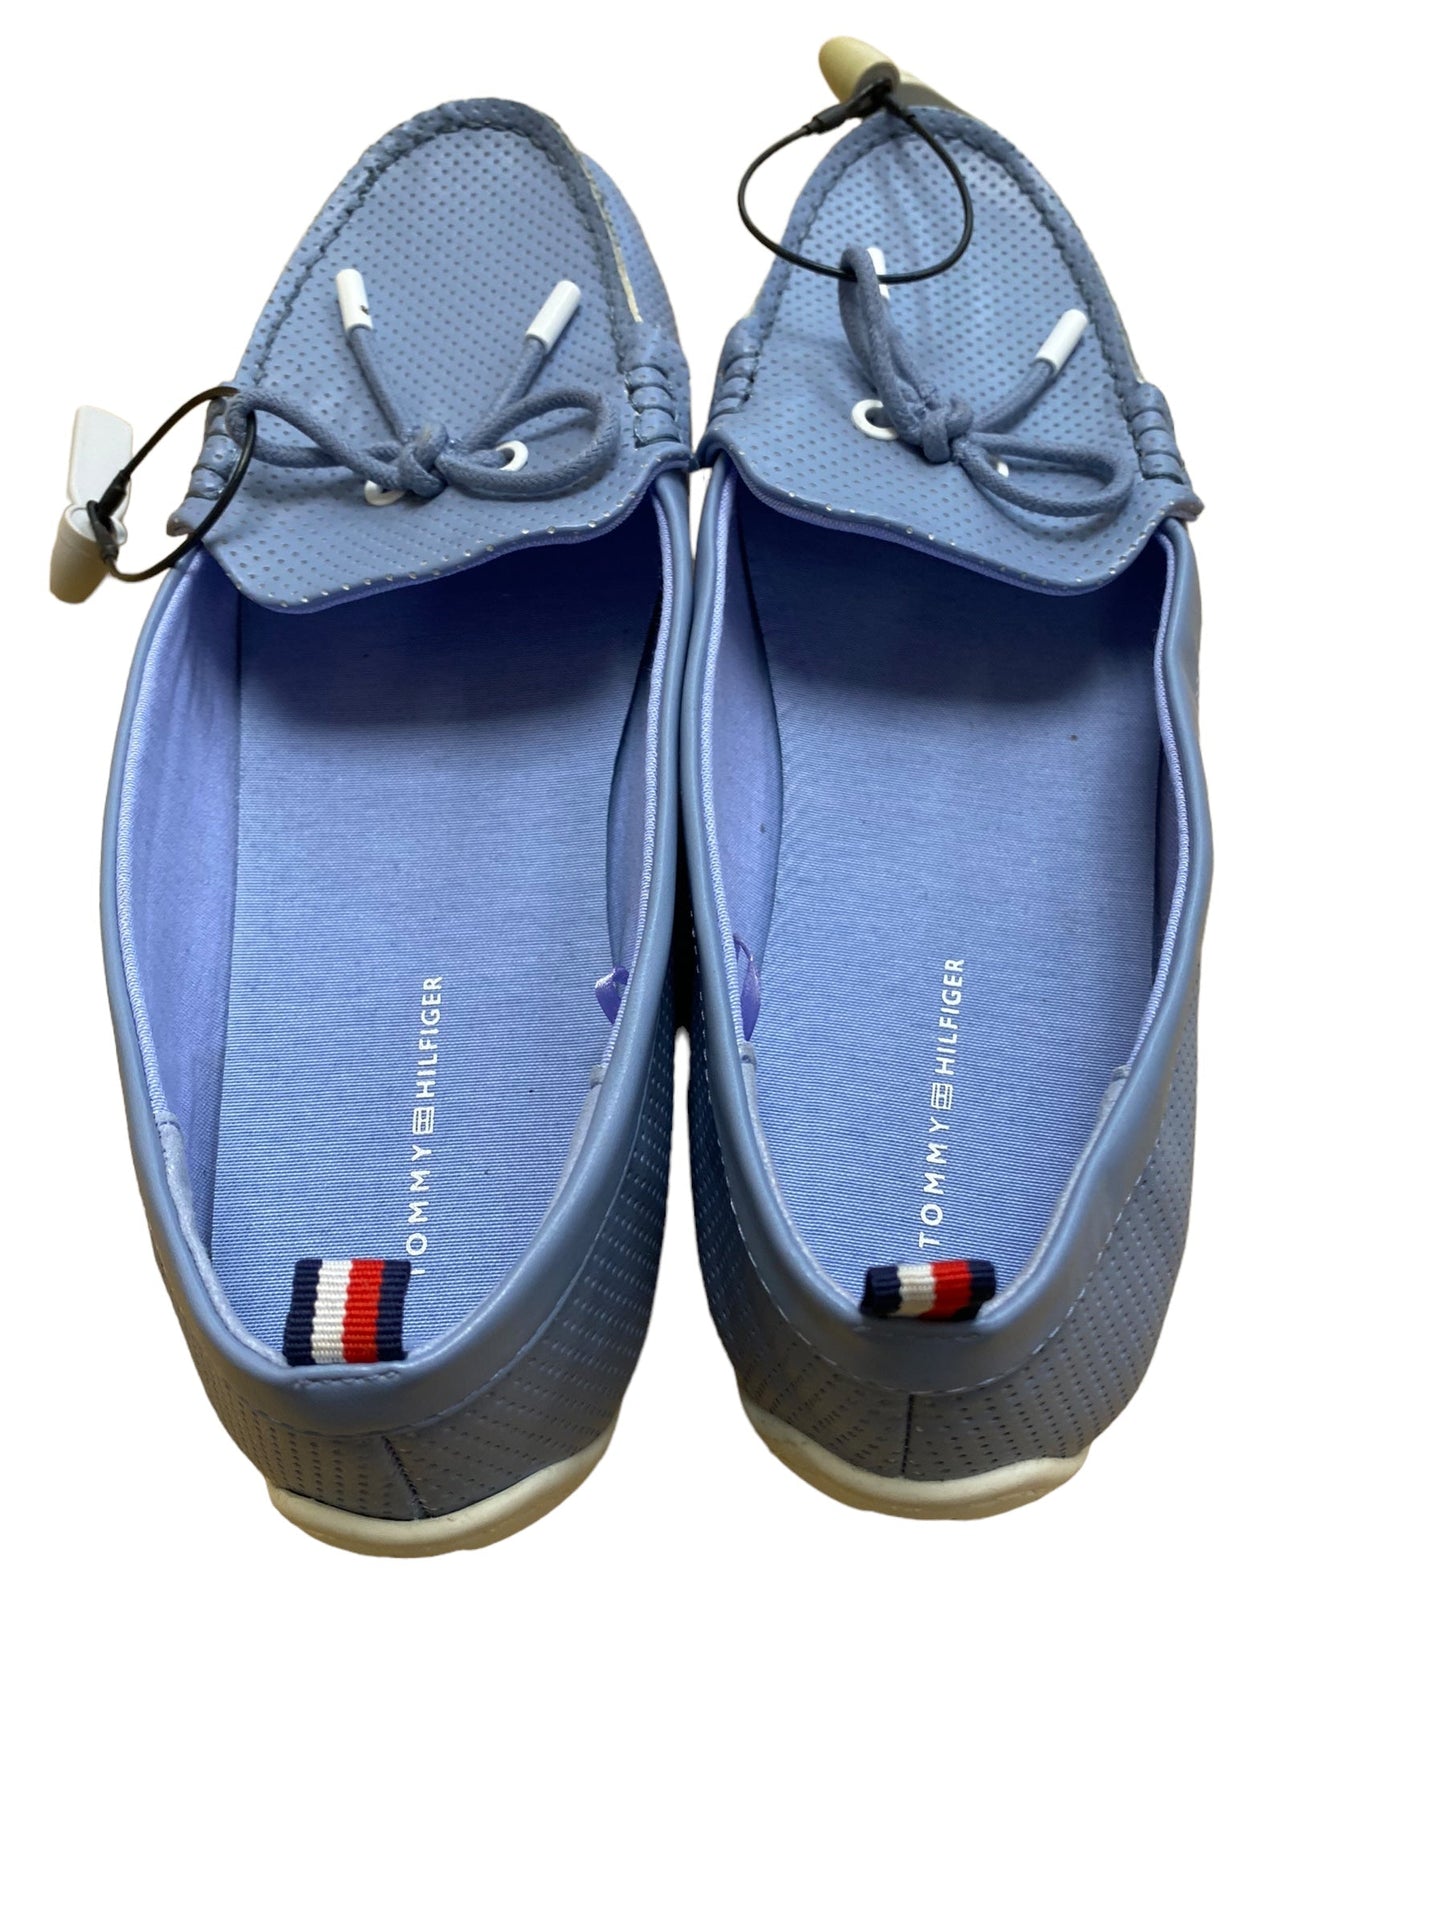 Shoes Flats By Tommy Hilfiger  Size: 11